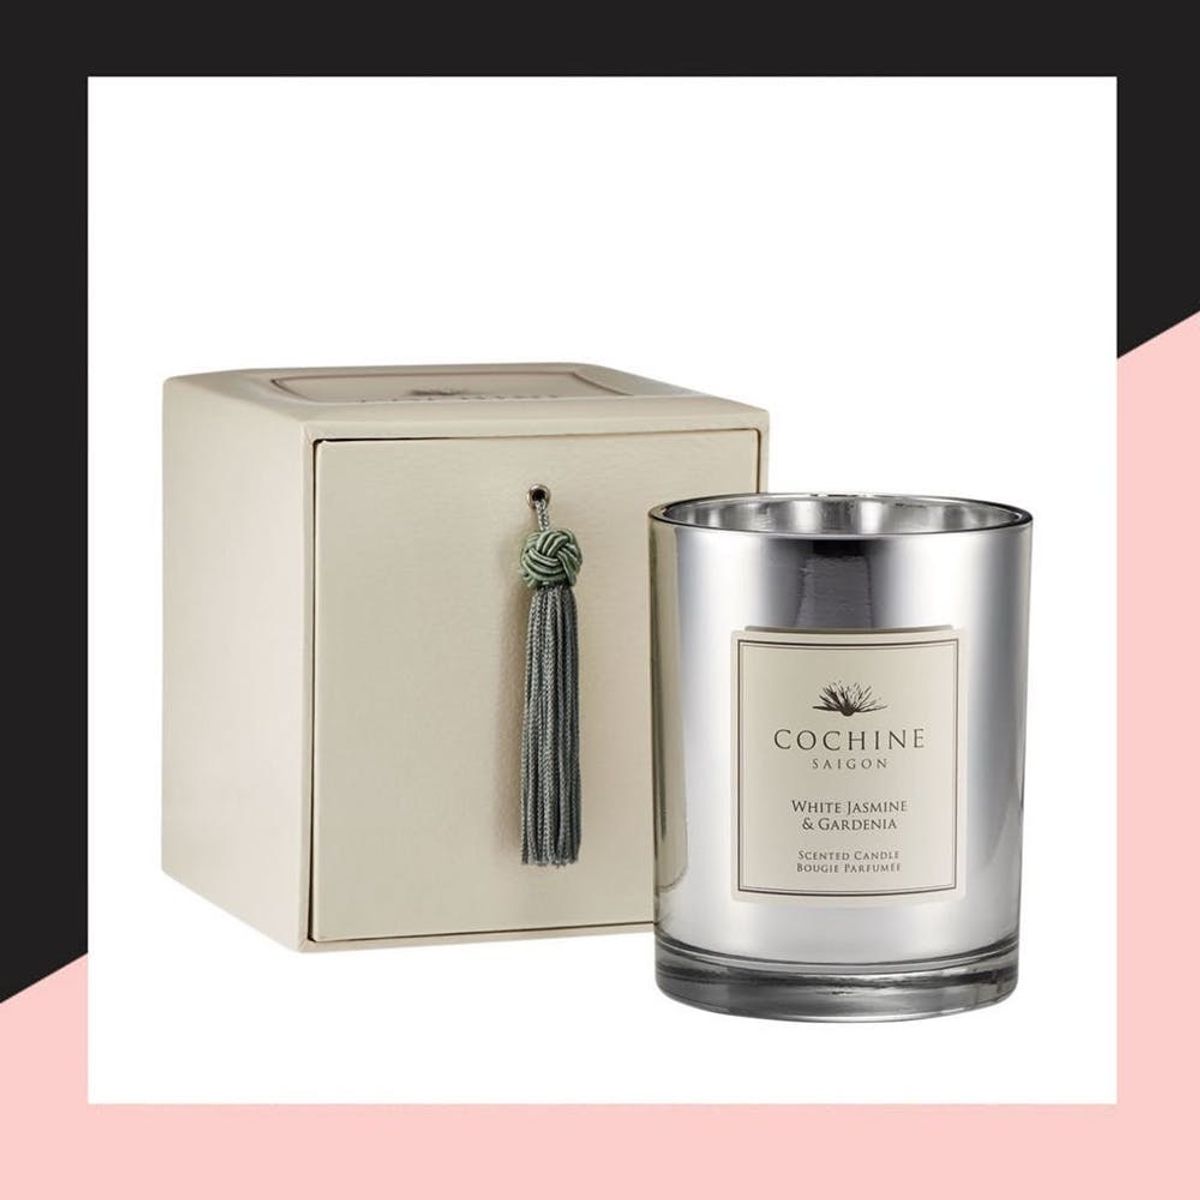 7 Travel Candles That’ll Create a Cozy Ambiance on Vacation